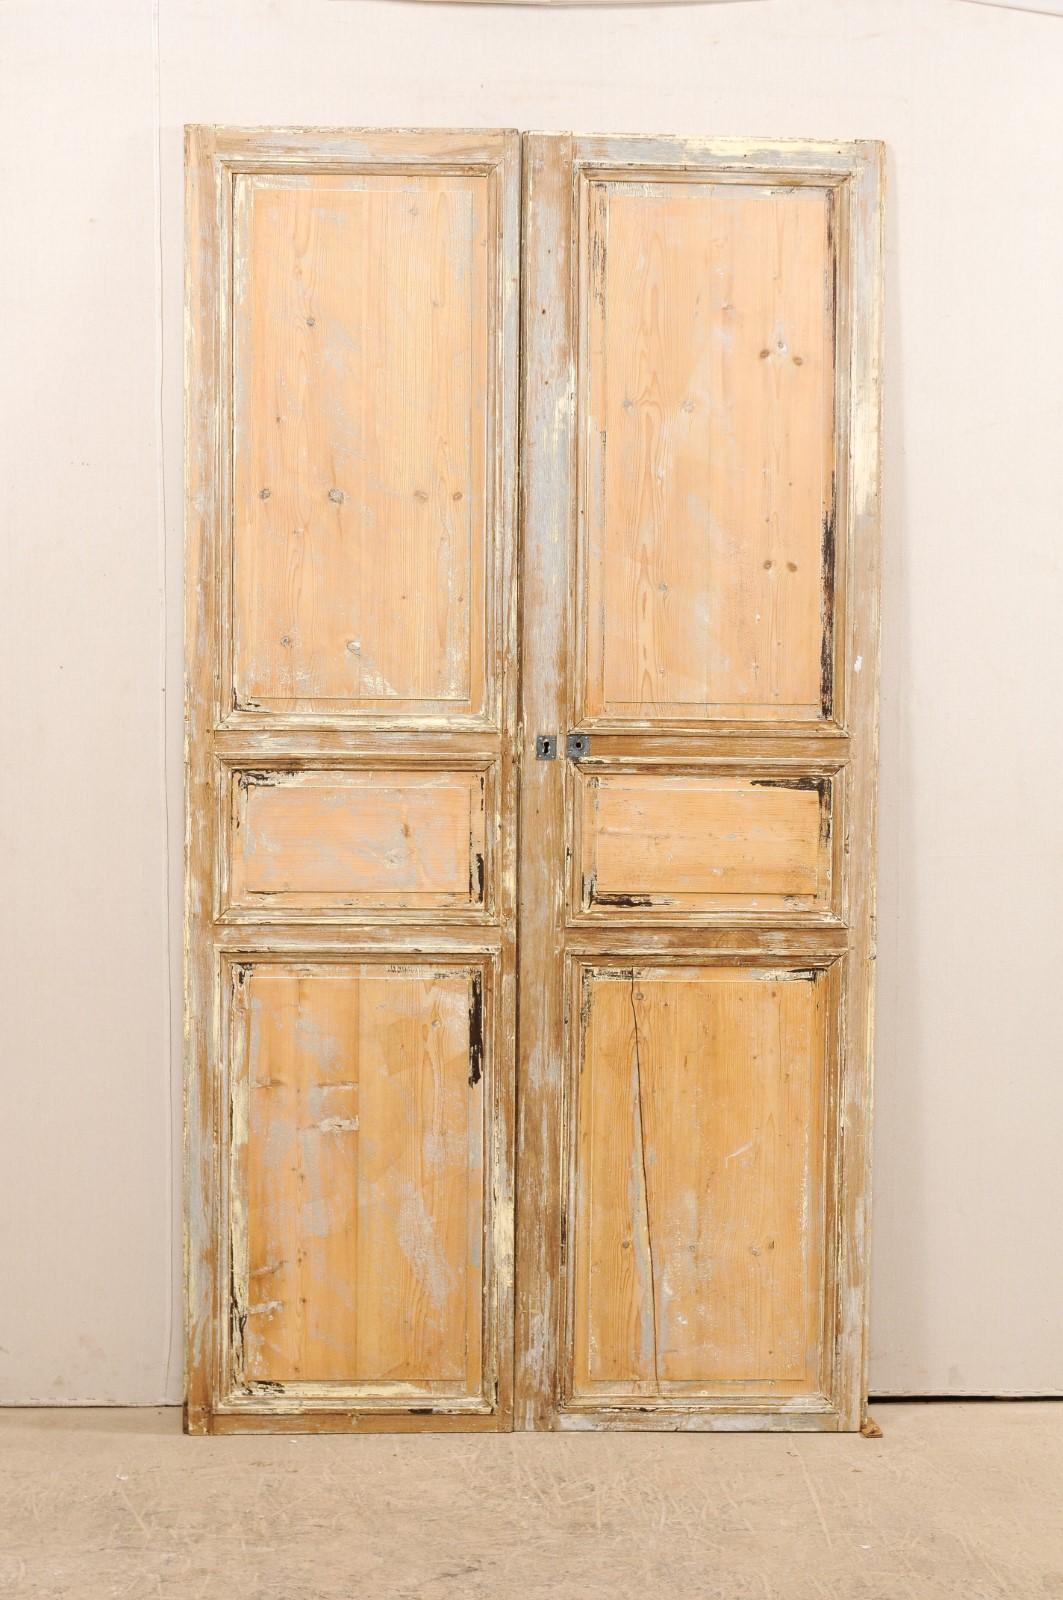 Pair of 19th Century French Painted Wood Doors with Lovely Cream Colored Finish 4